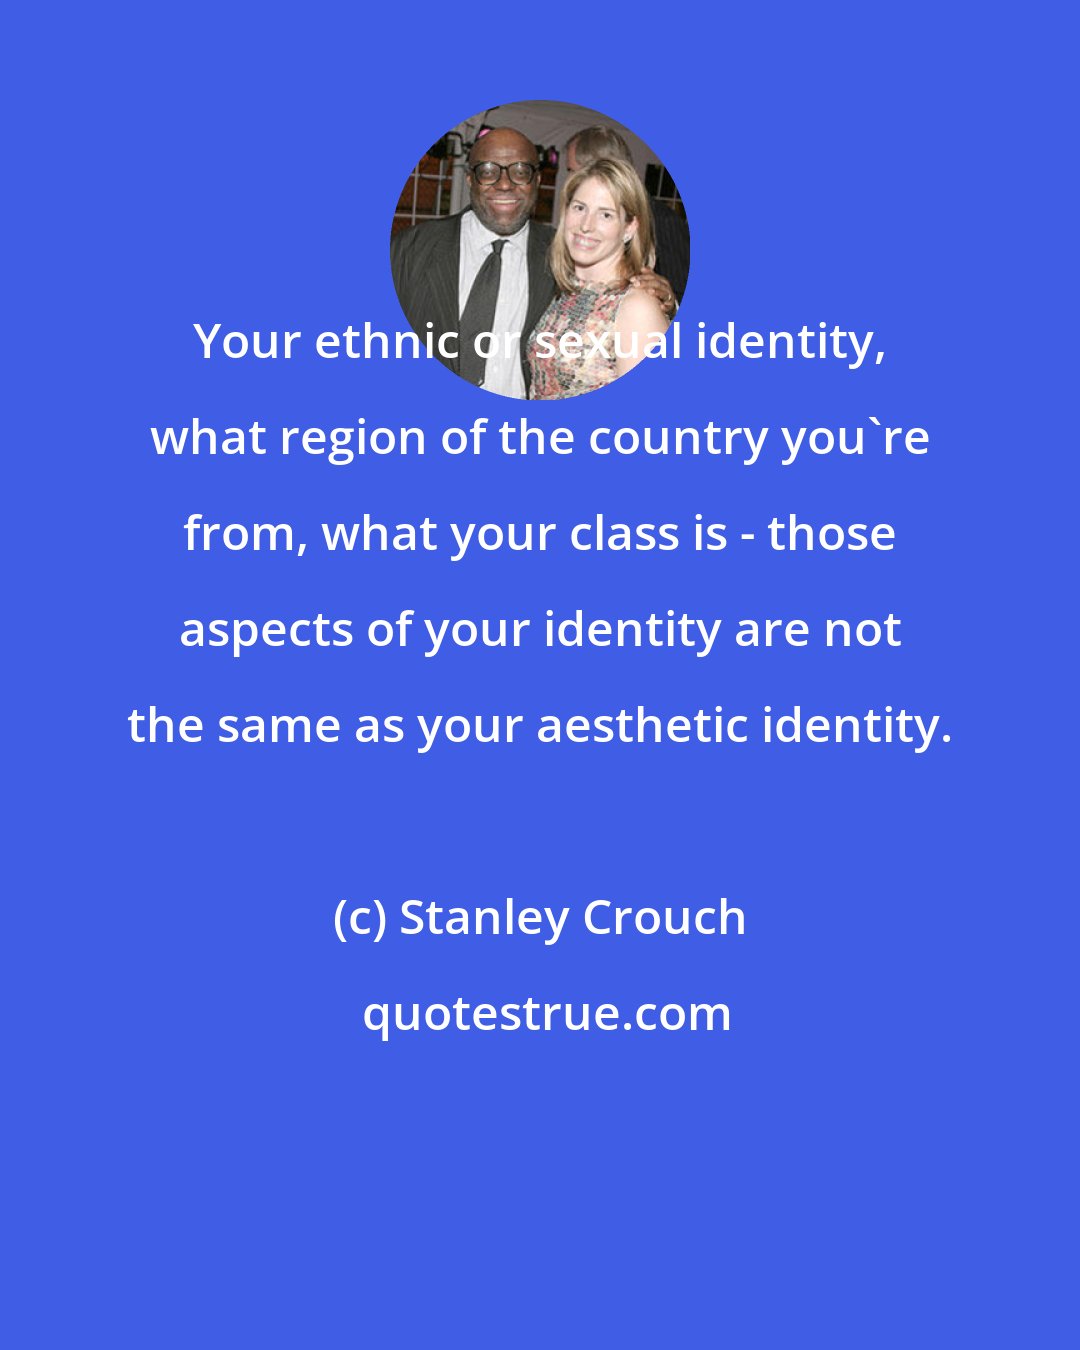 Stanley Crouch: Your ethnic or sexual identity, what region of the country you're from, what your class is - those aspects of your identity are not the same as your aesthetic identity.